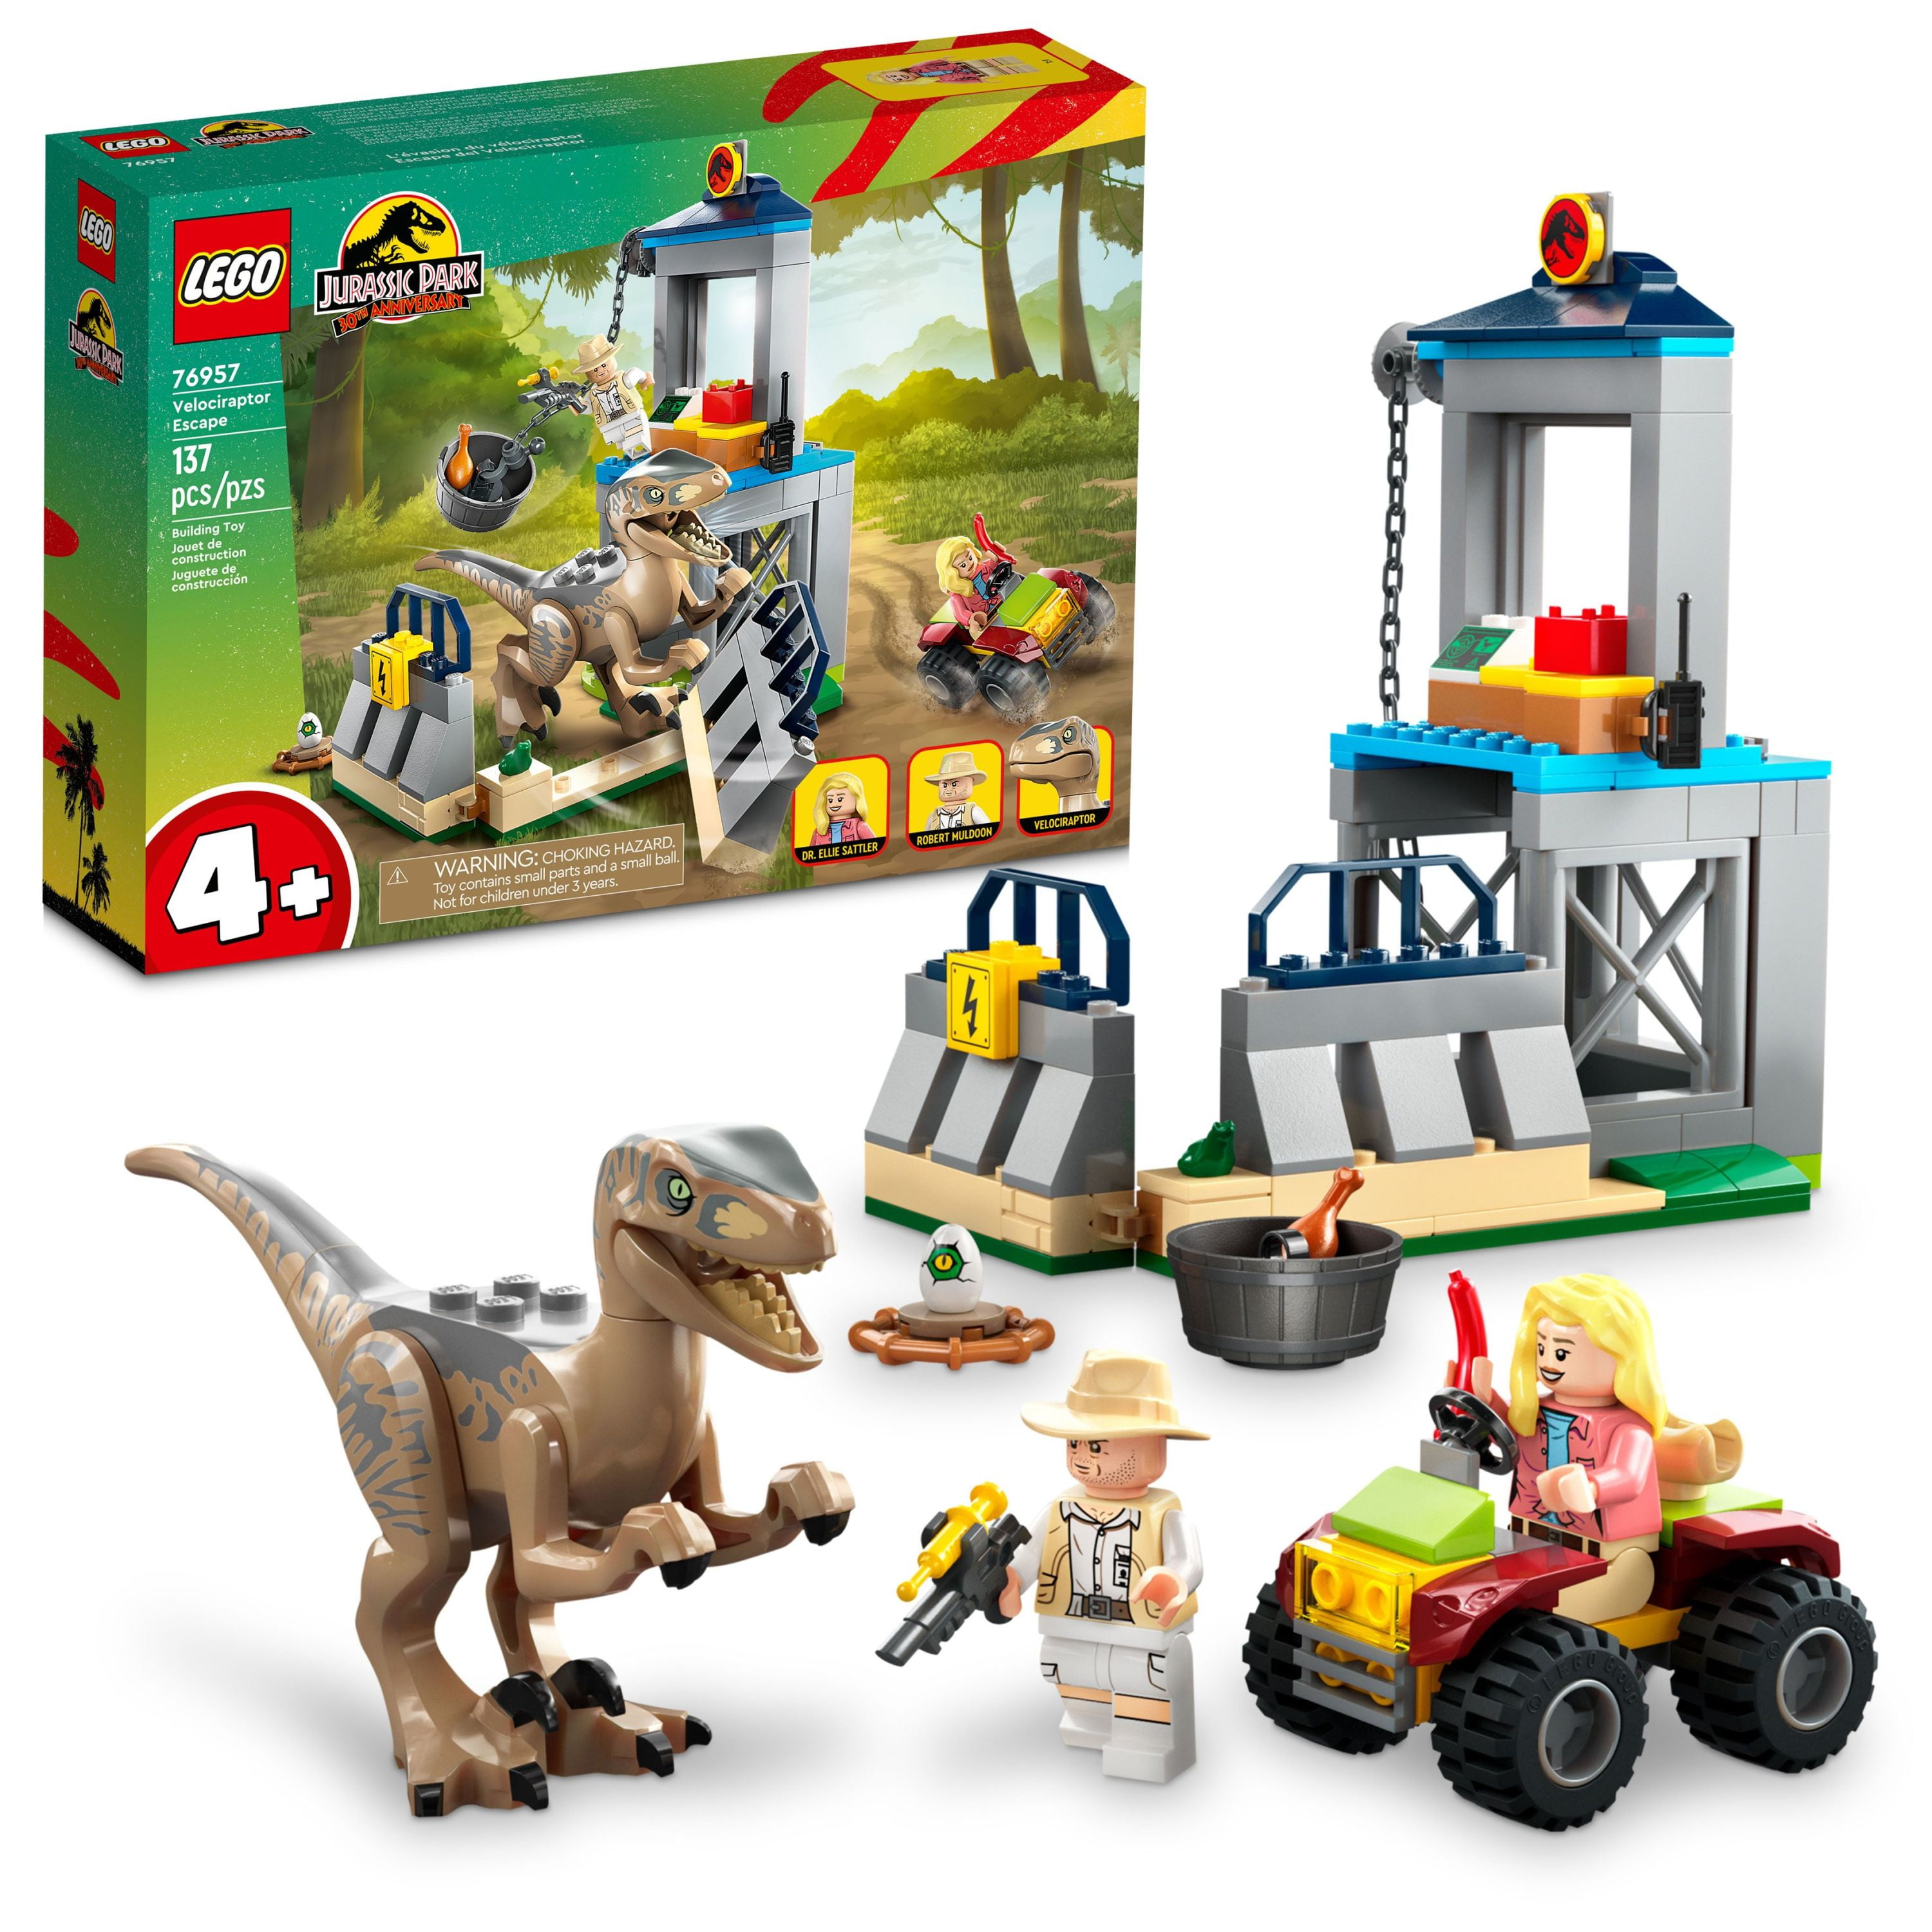 LEGO Jurassic Park Velociraptor Escape 76957 Learn to Build Dinosaur Toy  for boys and girls, Gift for Kids Aged 4 and Up Featuring a Buildable